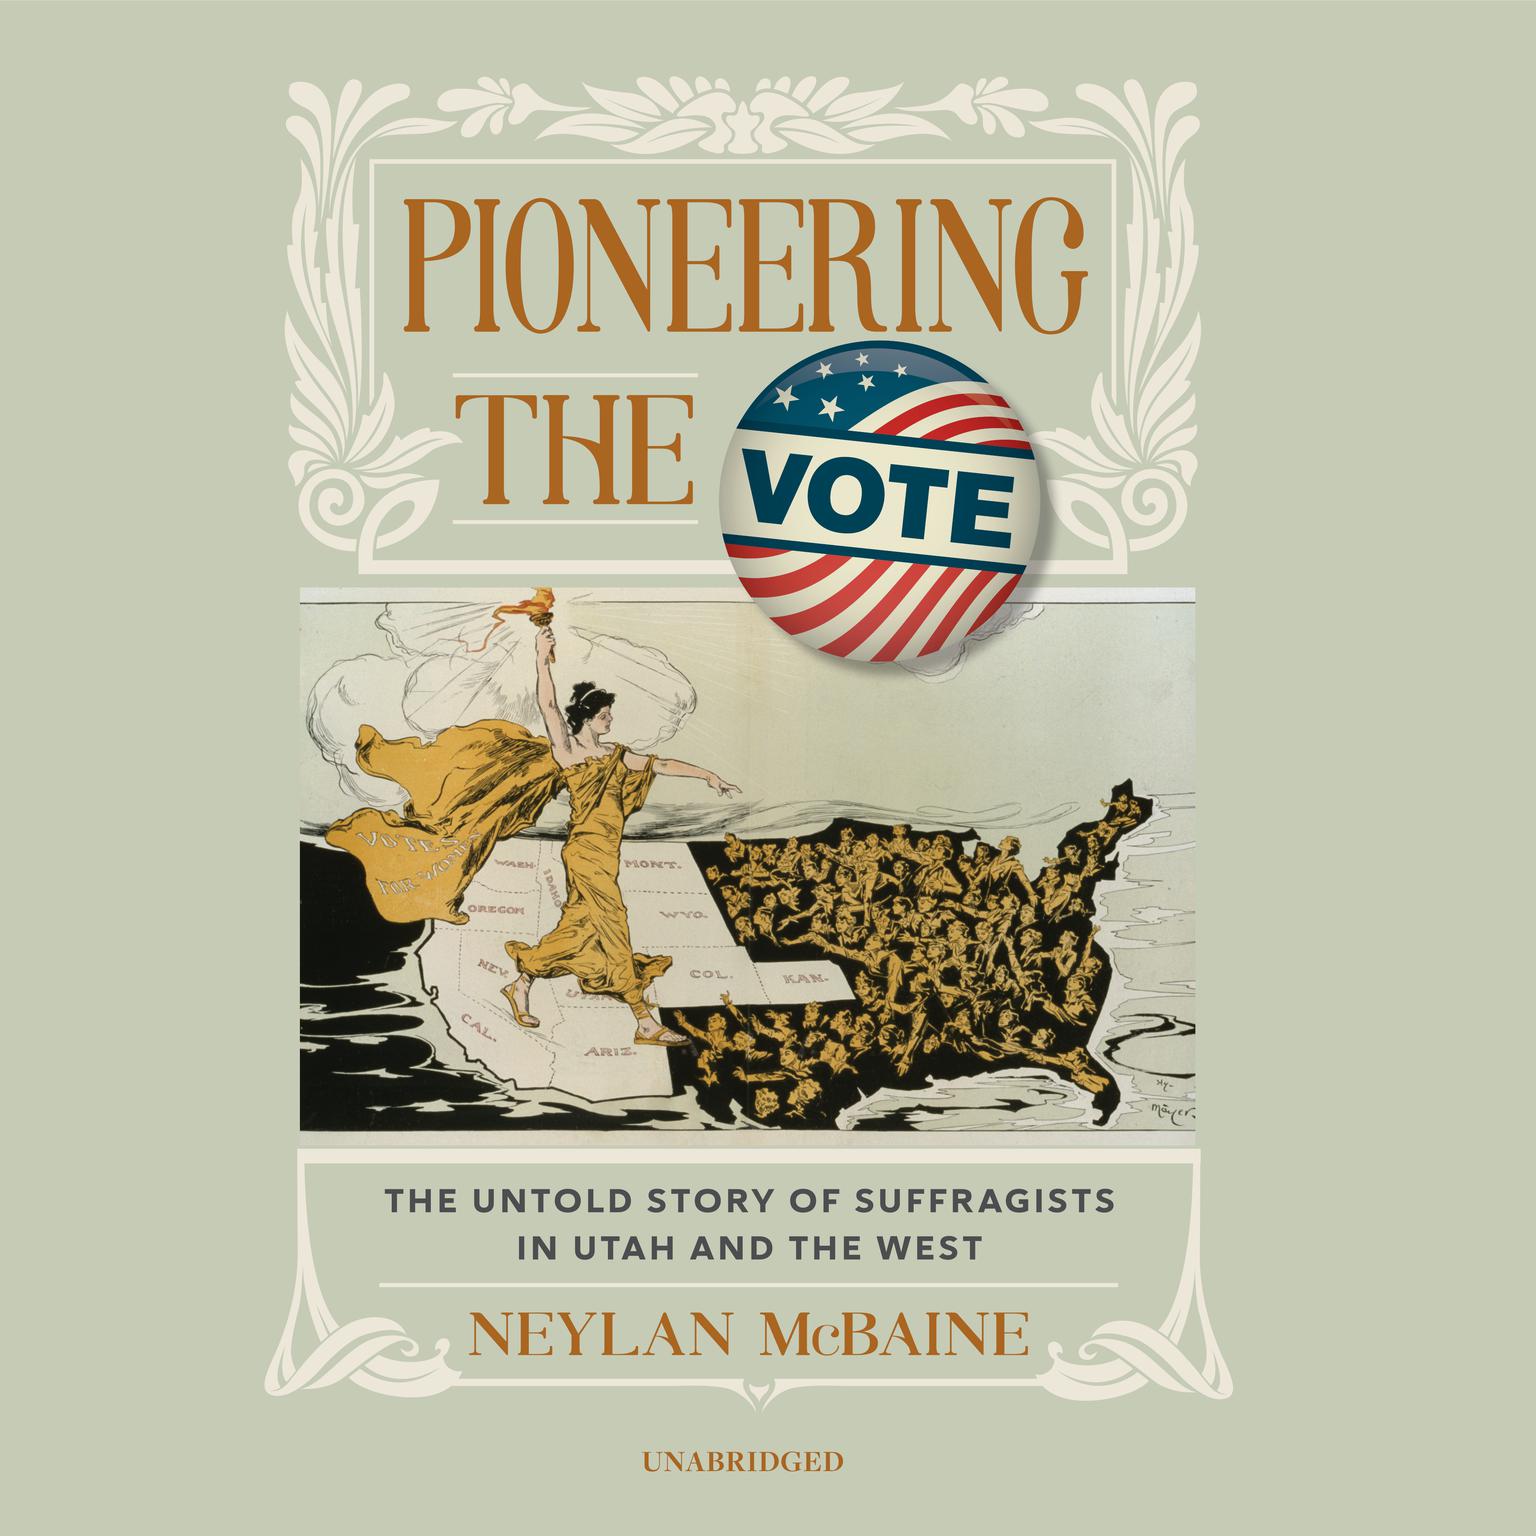 Pioneering the Vote: The Untold Story of Suffragists in Utah and the West Audiobook, by Neylan McBaine